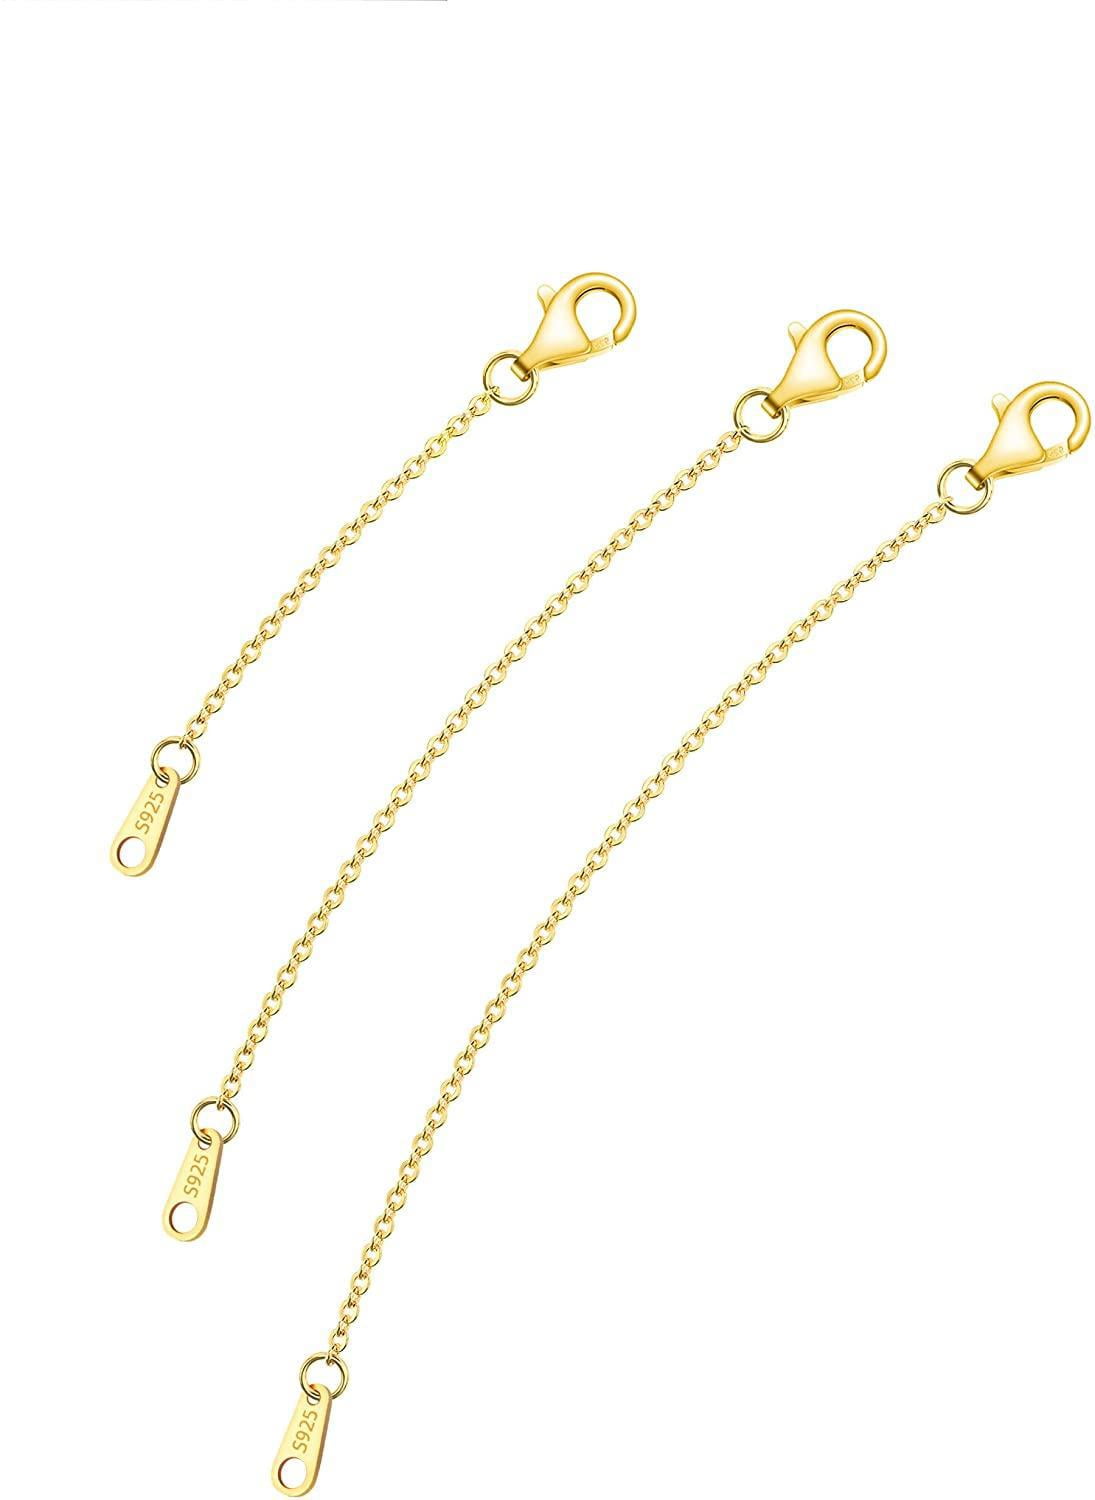 Necklace Extender Gold Necklace Extenders 925 Sterling Silver Extender for  Necklaces 14K Gold Chain Extenders for Women Bracelet Extender Gold  Necklace Extension 2inch 3inch 4inch 